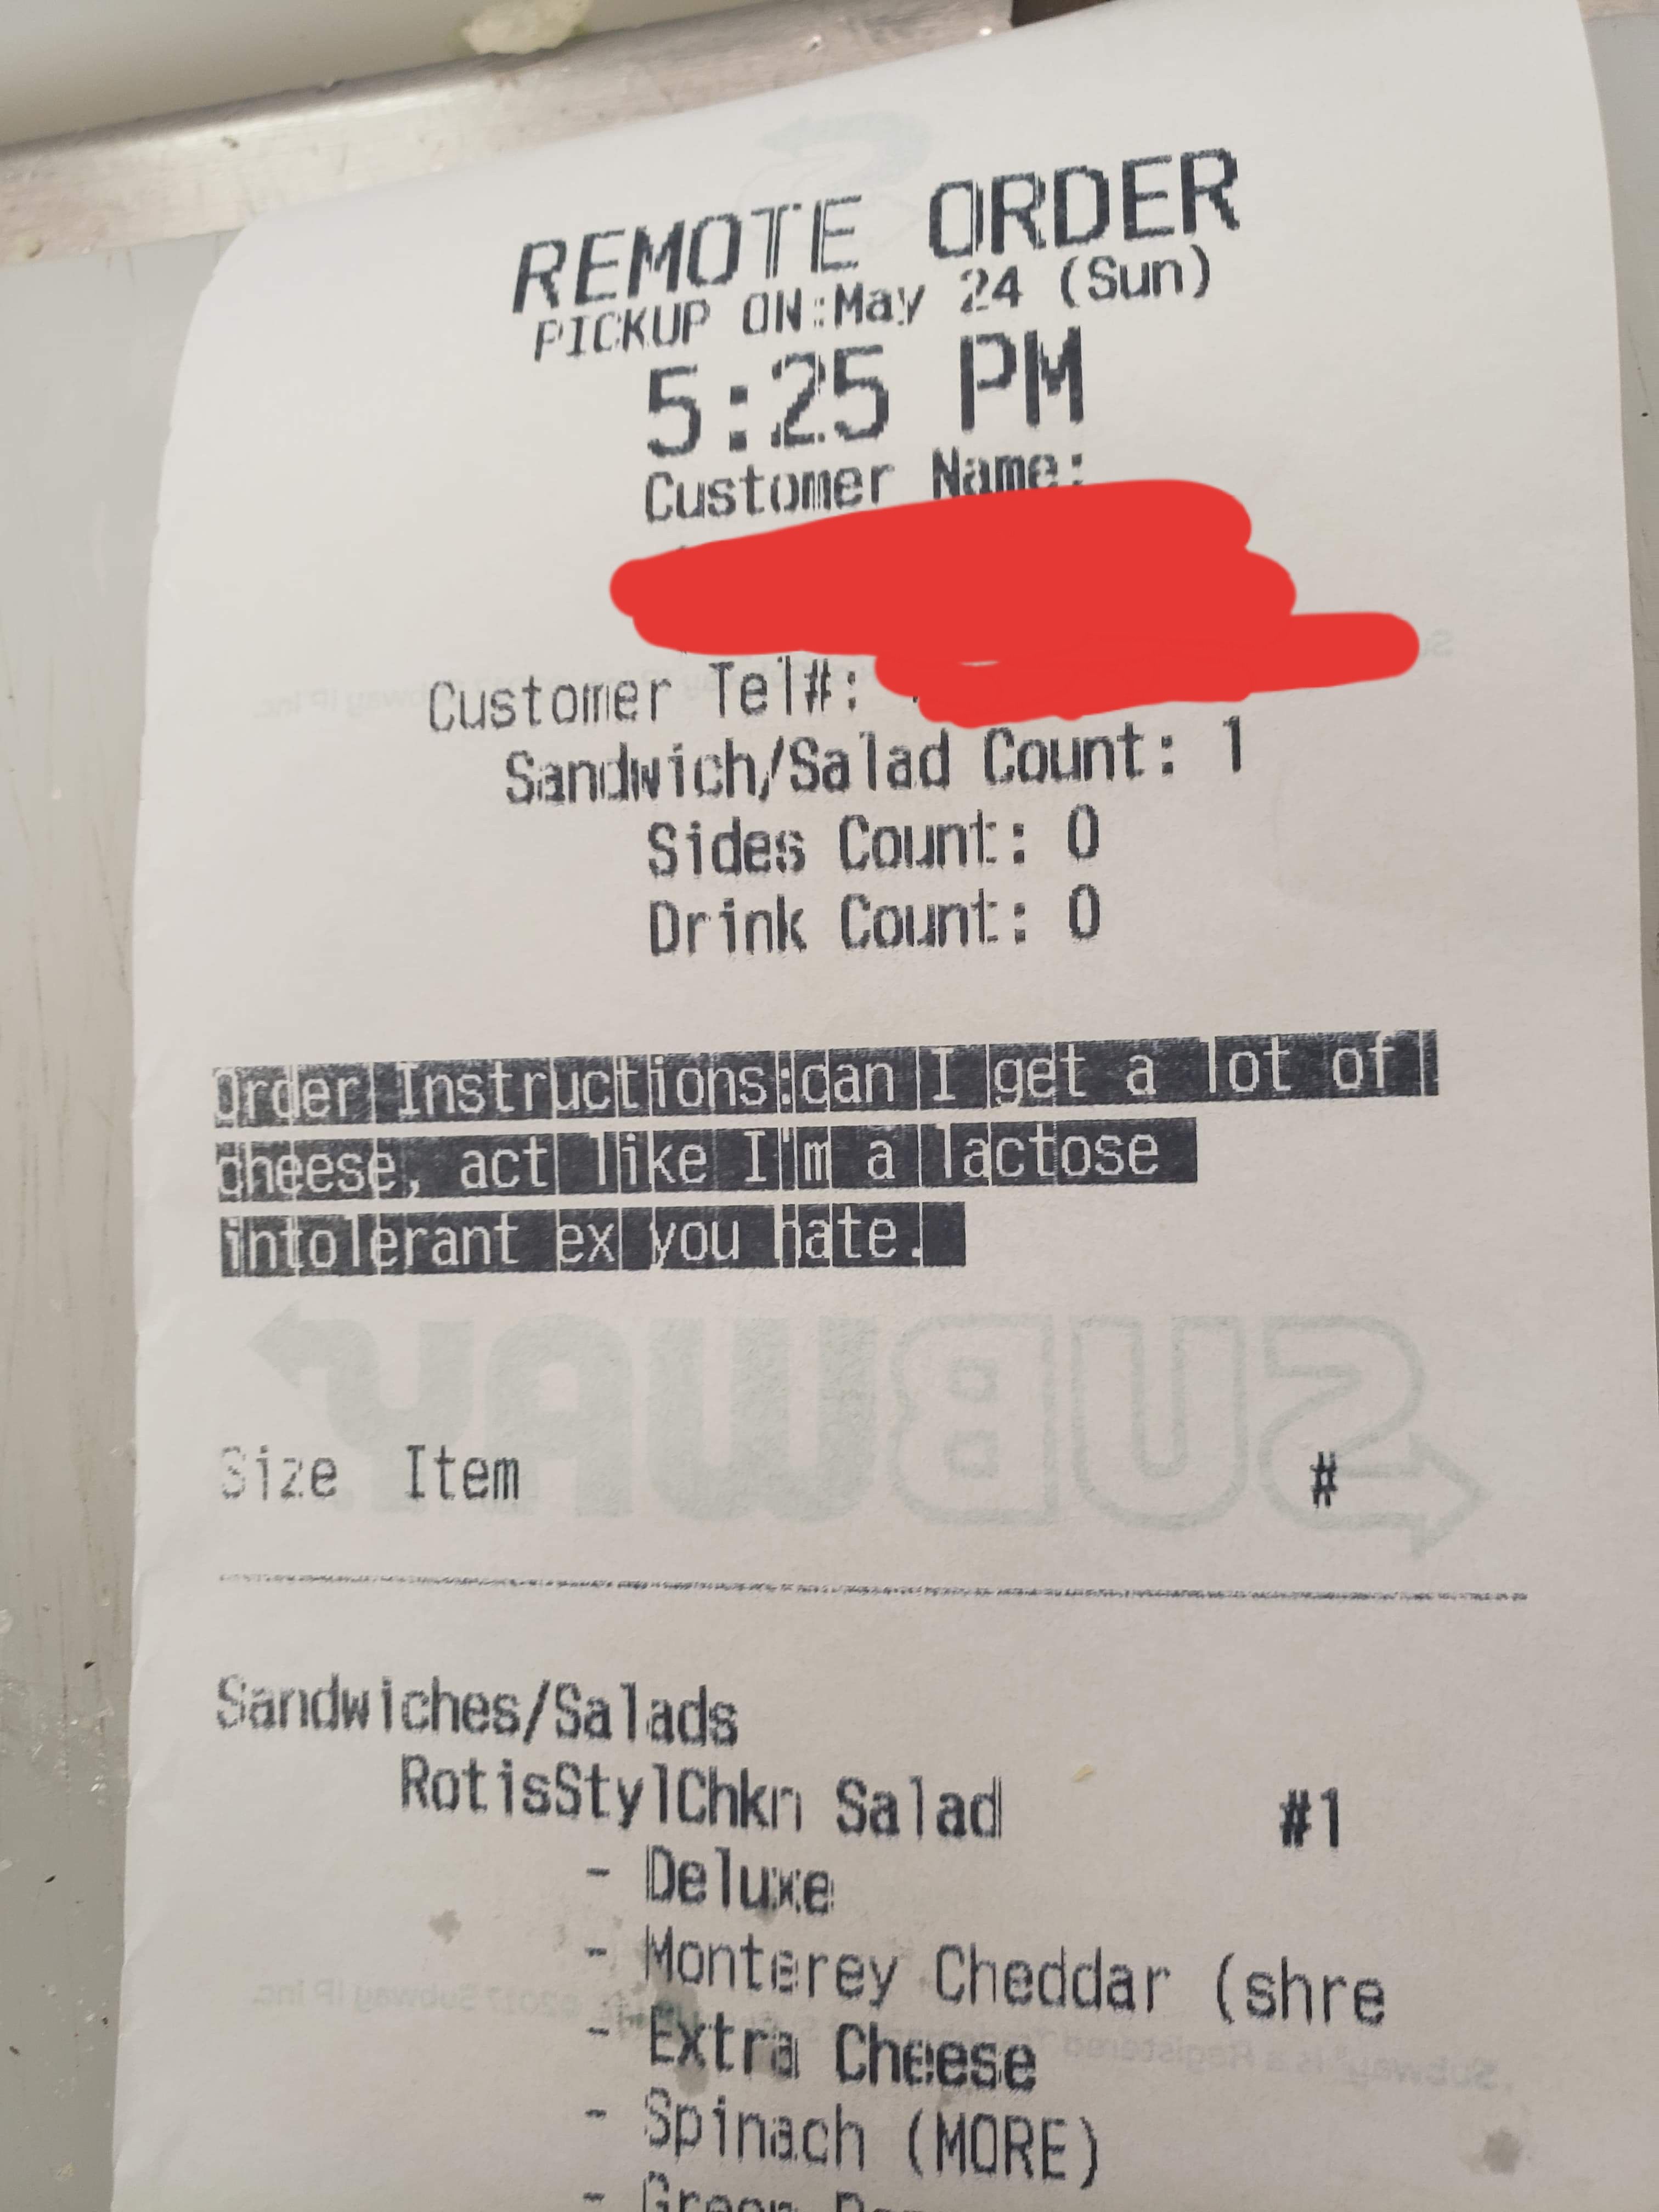 I work at a subway, we got this special request.